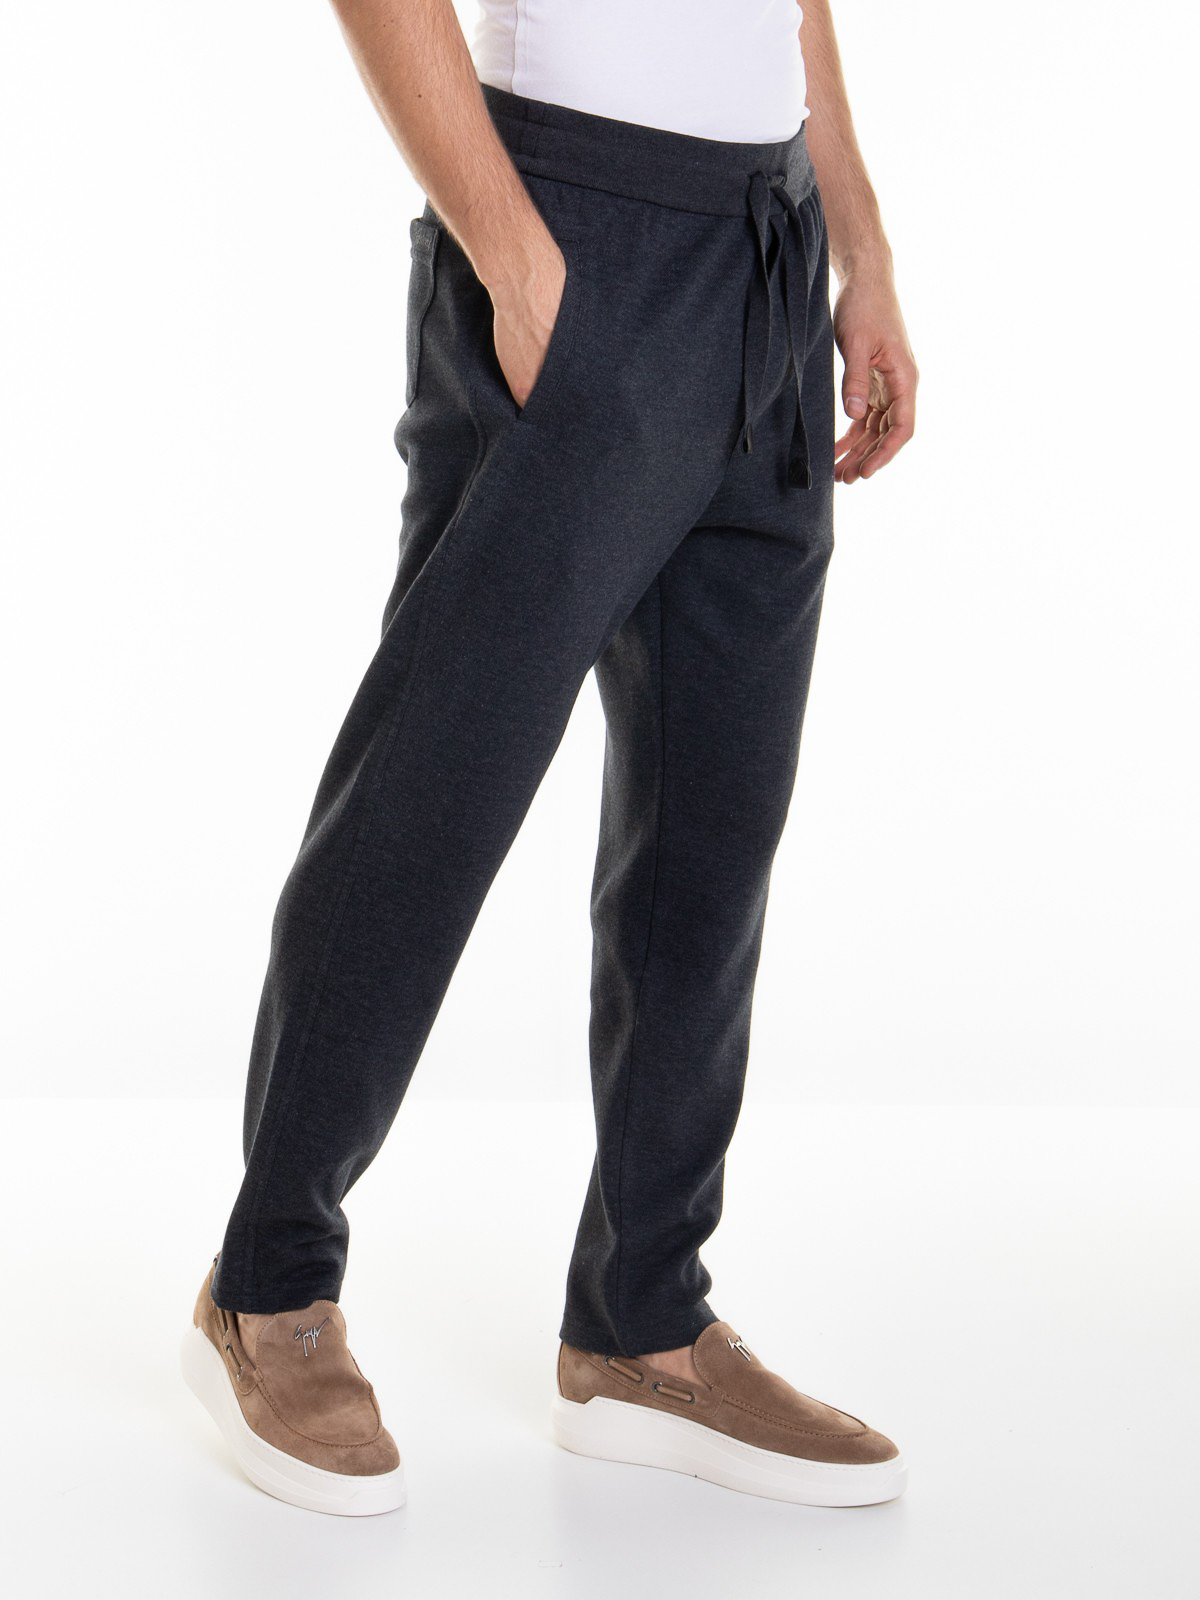 Buy high-quality cotton trousers online | MEYER-Hosen